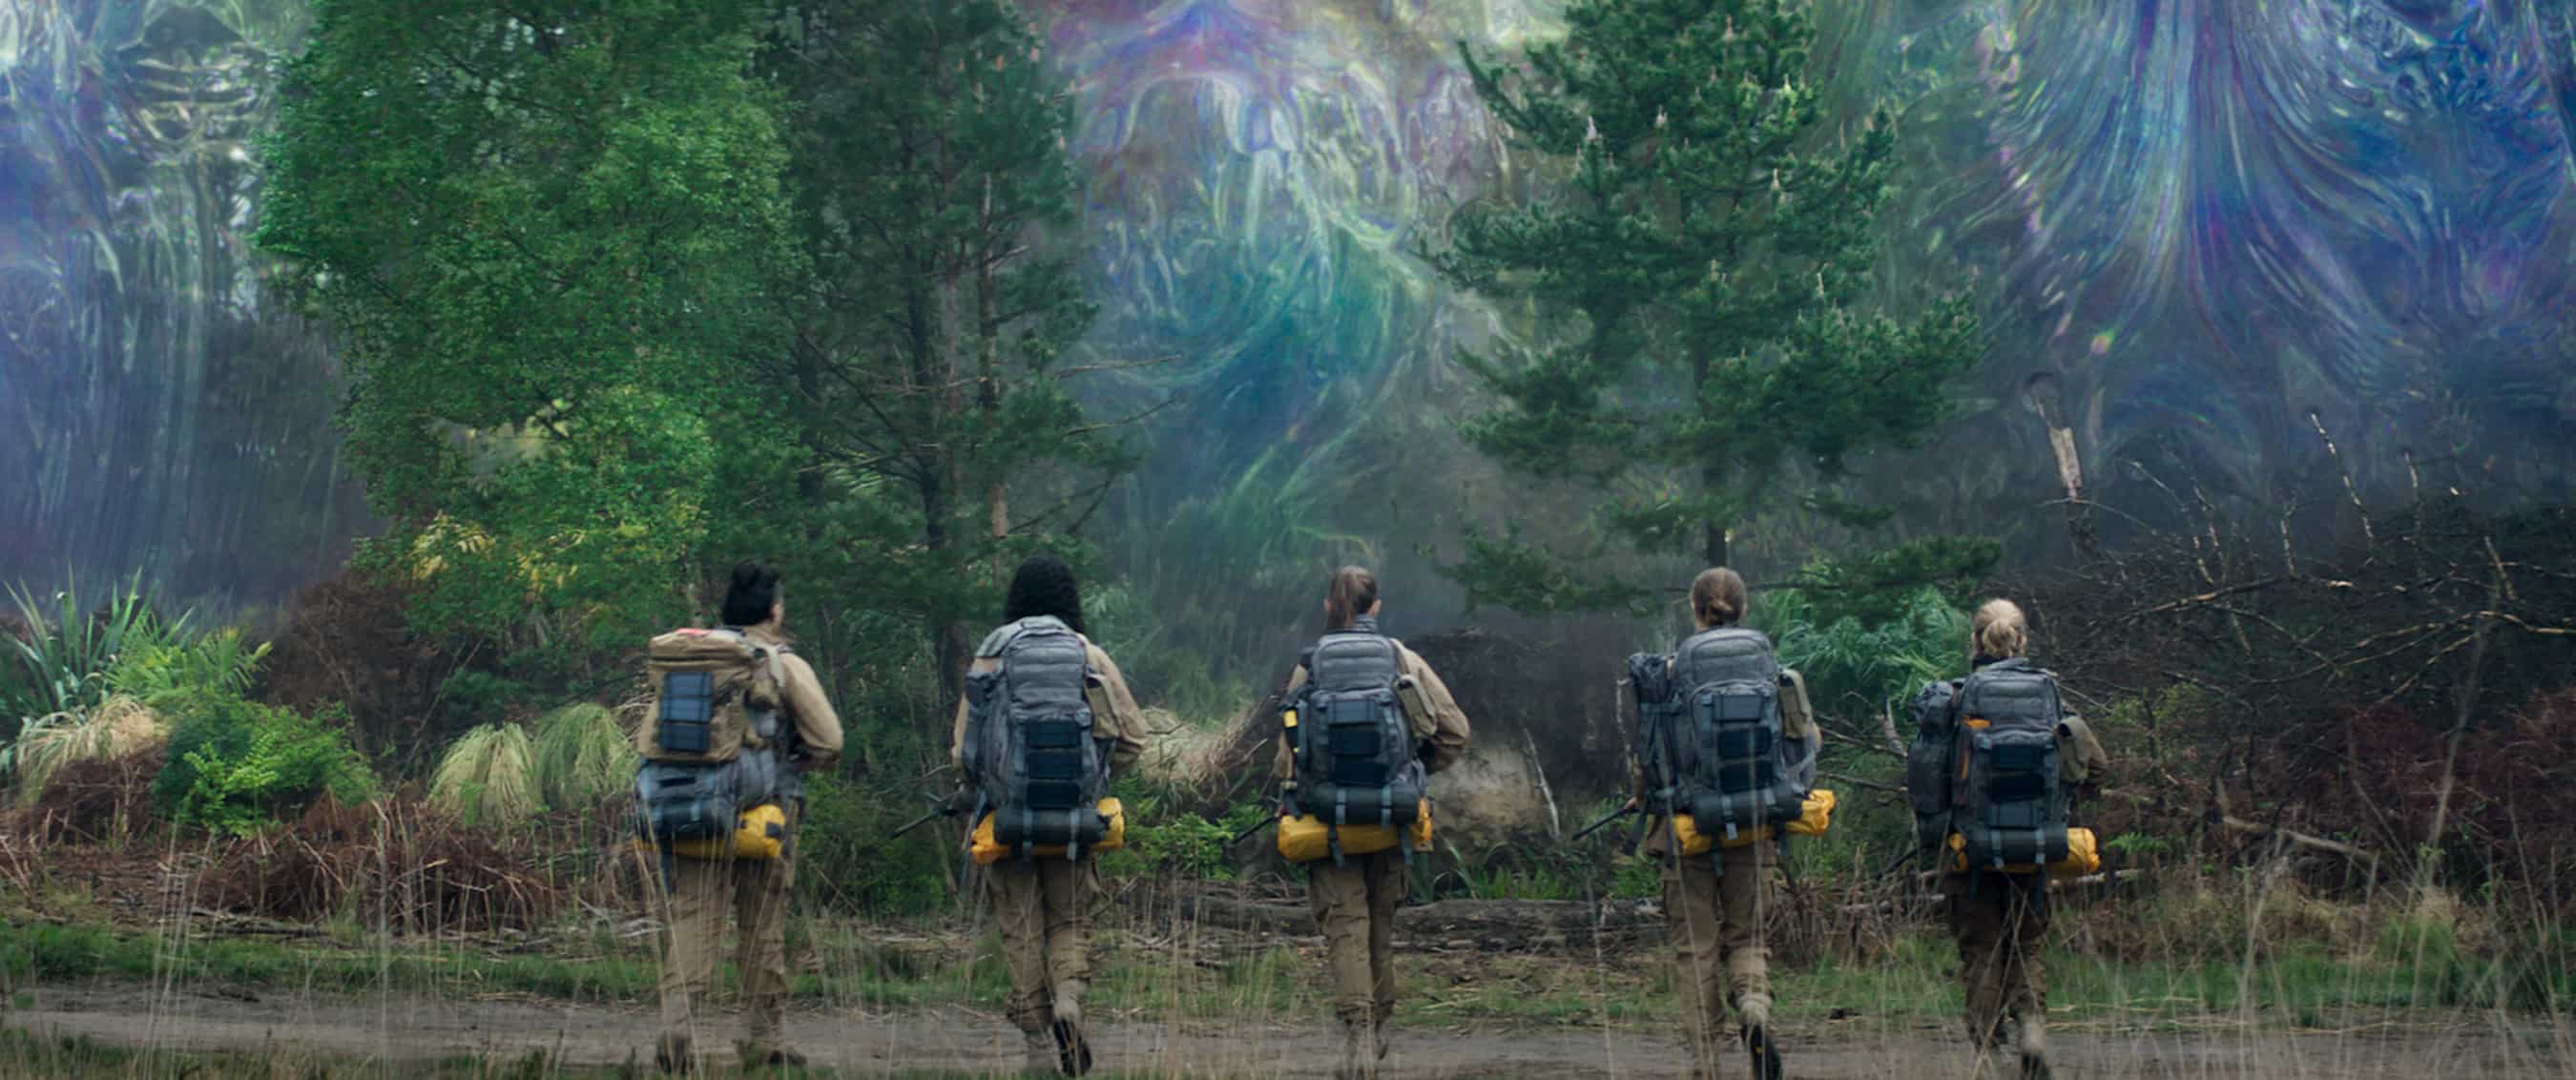 Eric’s Review: Annihilation (2018)